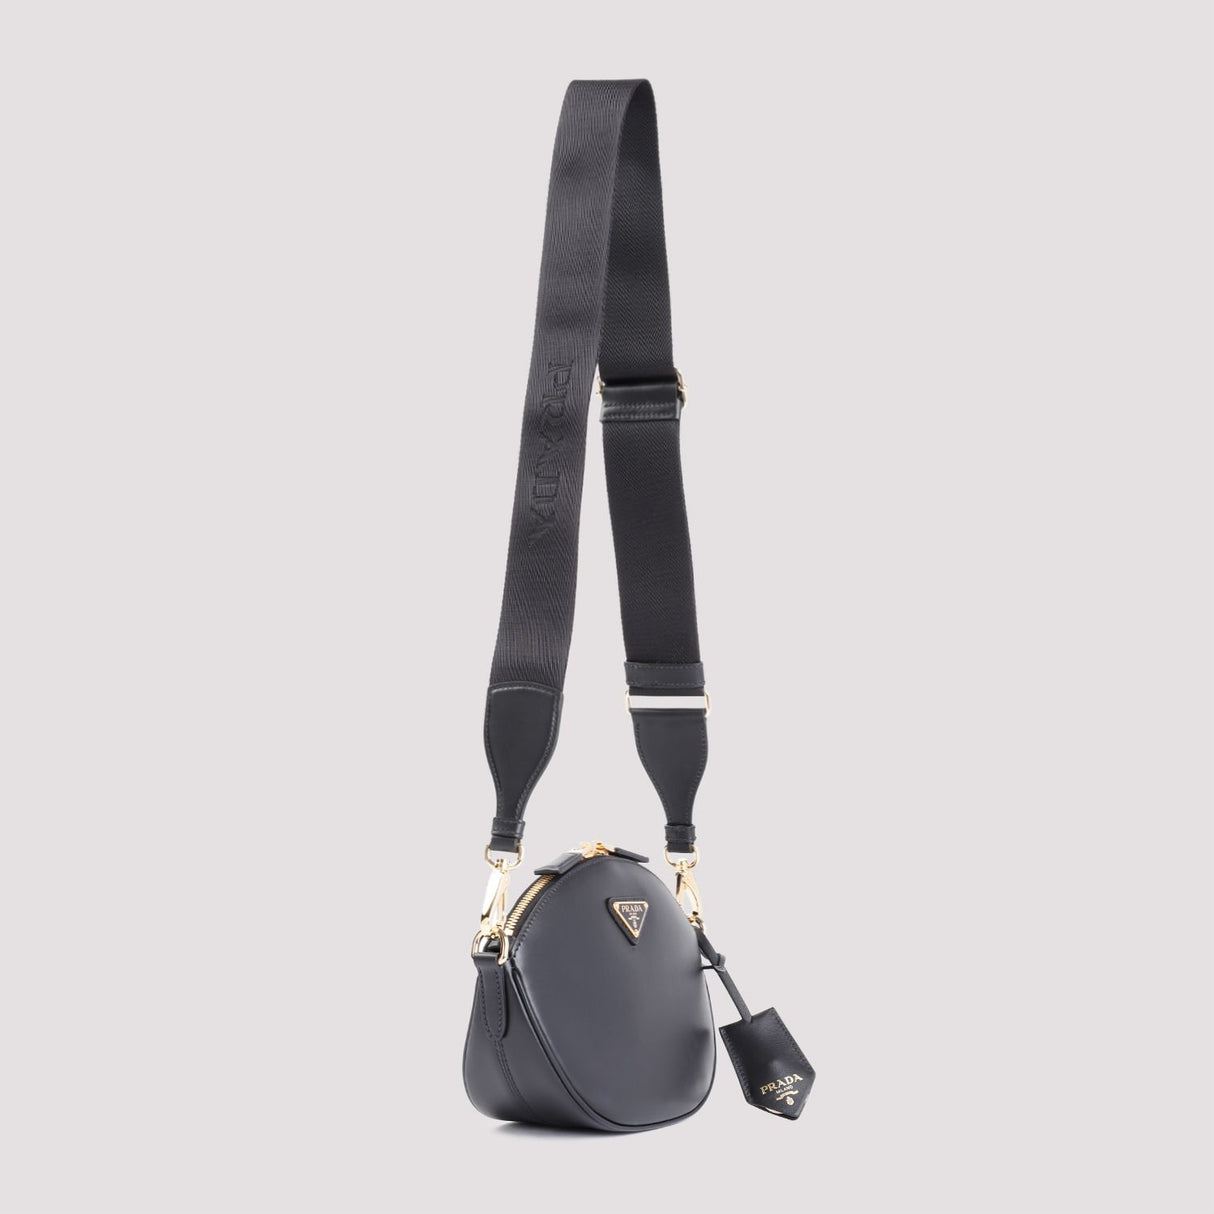 PRADA Chic Black Leather Mini Crossbody Bag with Gold-Tone Accents and Adjustable Strap